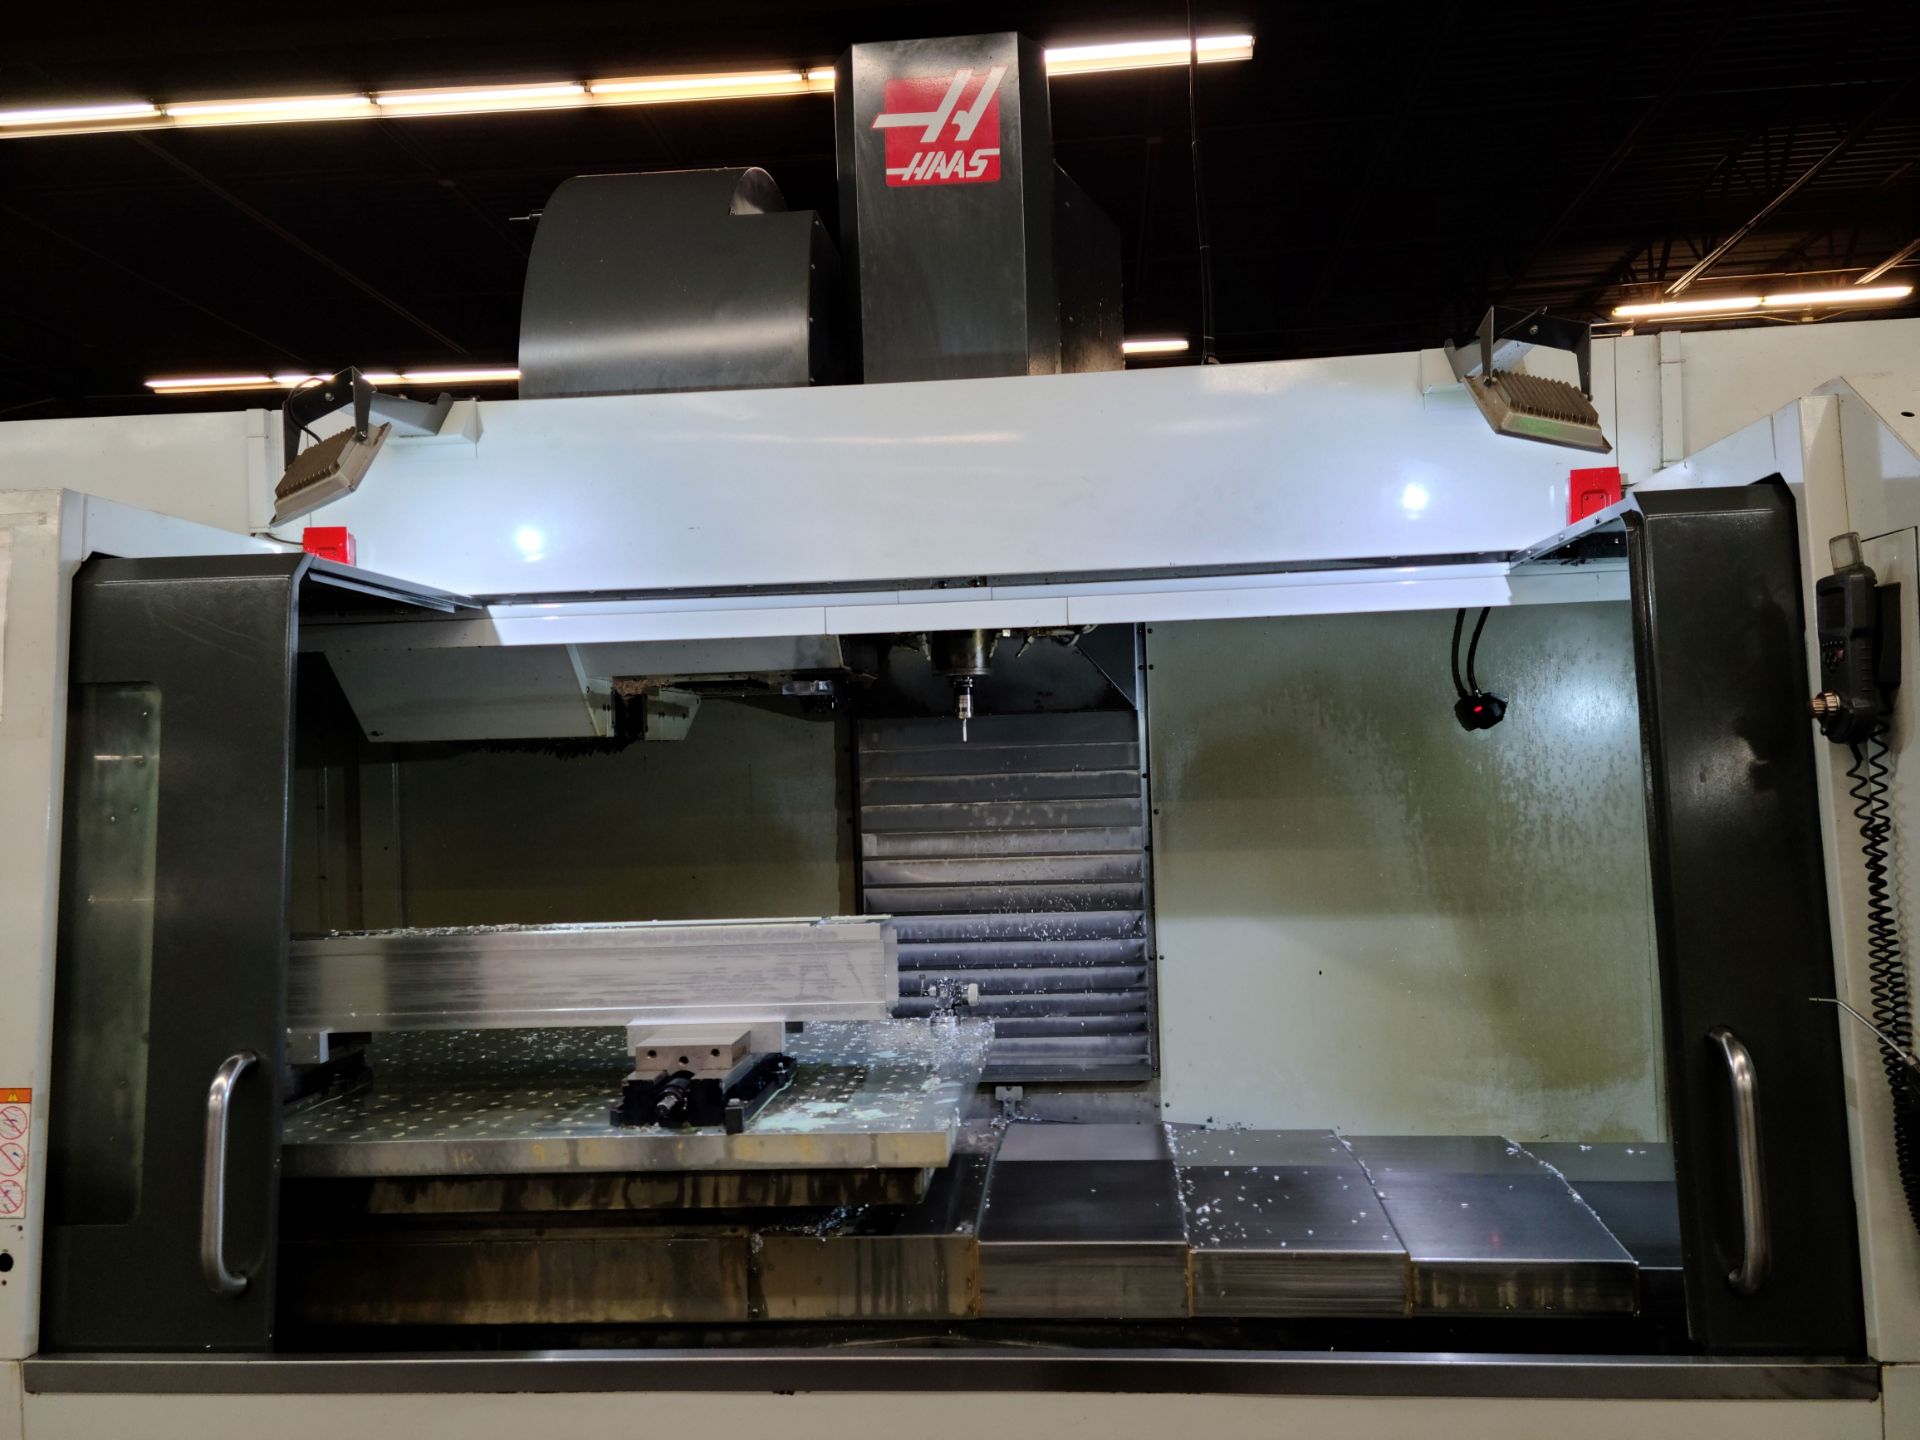 2017 HAAS VF-9/40 VERTICAL MACHINING CENTER, XYZ TRAVELS: 84" X 40" X 30", 84" X 36" TABLE, 8100 RPM - Image 24 of 28